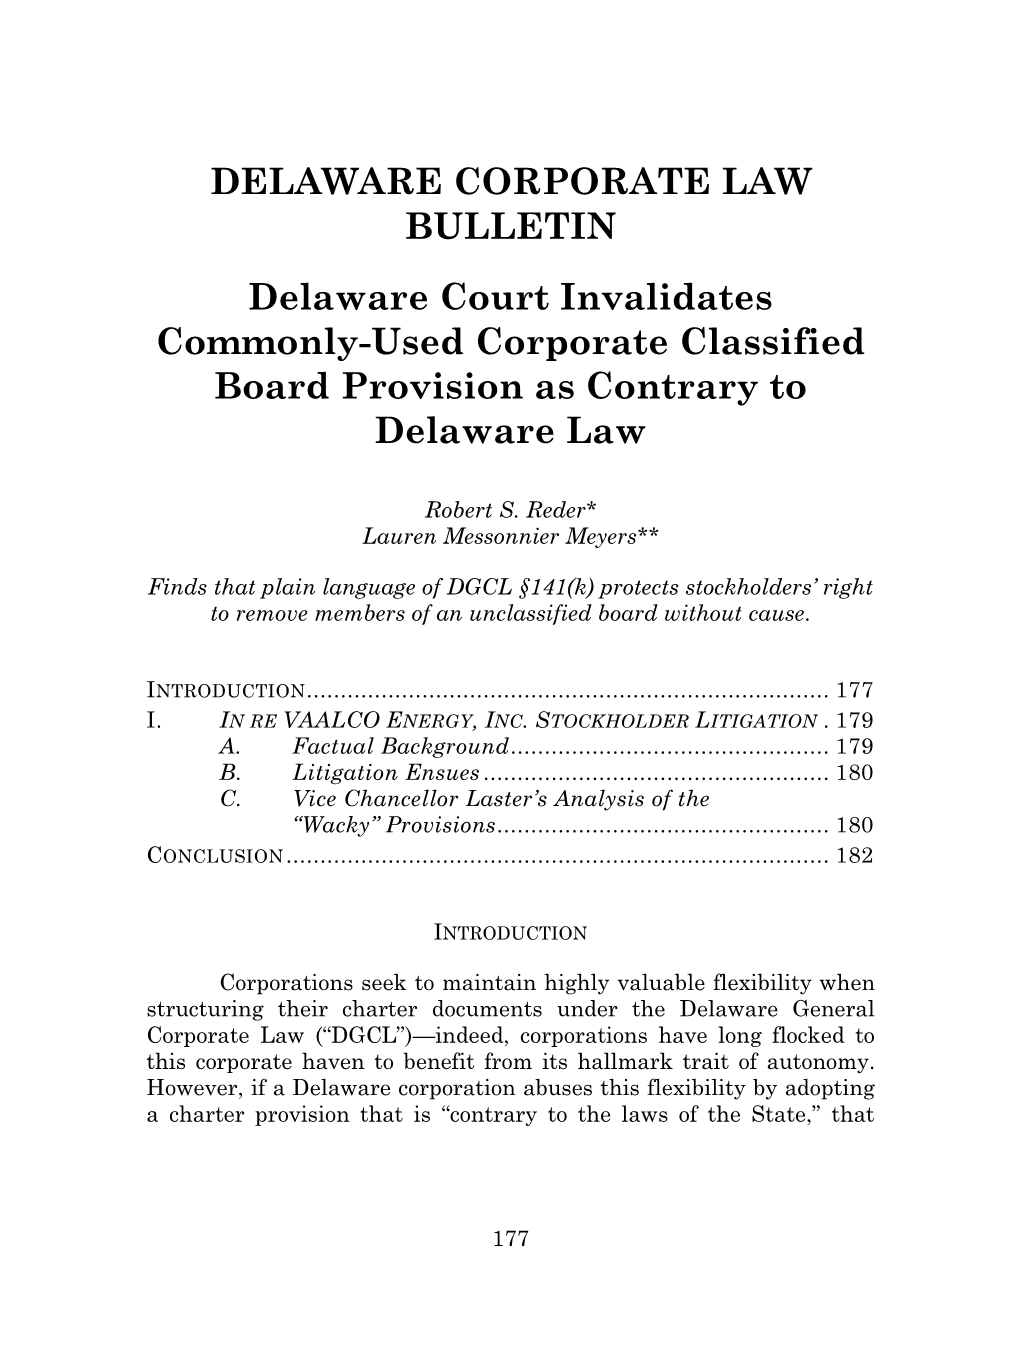 Delaware Court Invalidates Commonly-Used Corporate Classified Board Provision As Contrary to Delaware Law